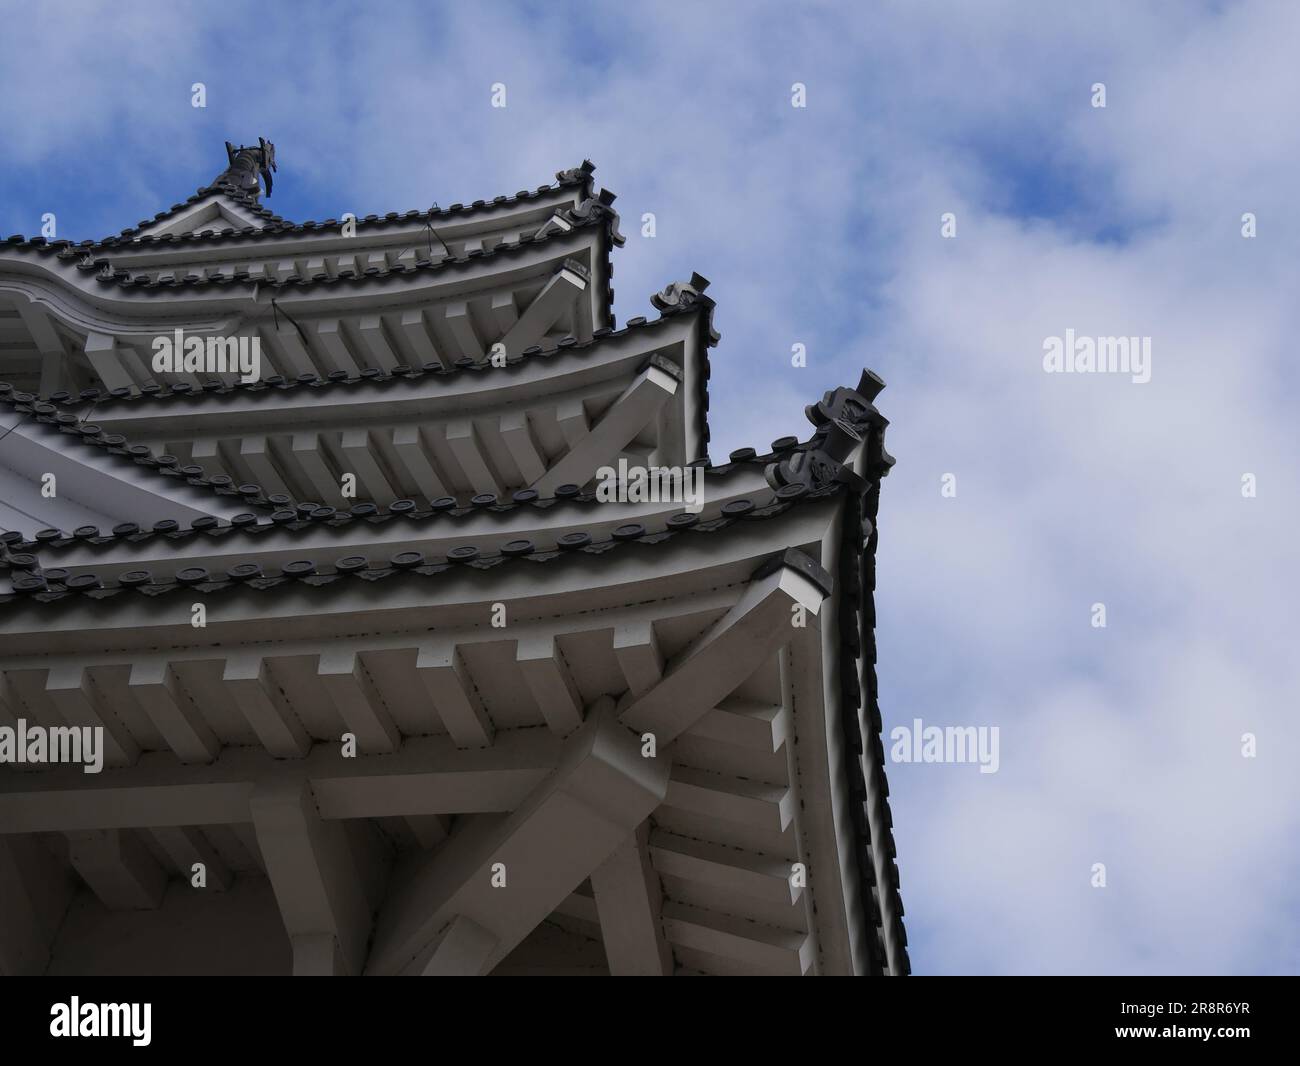 Himeji castle, view from underneath the roof, Kansai, Japan Stock Photo